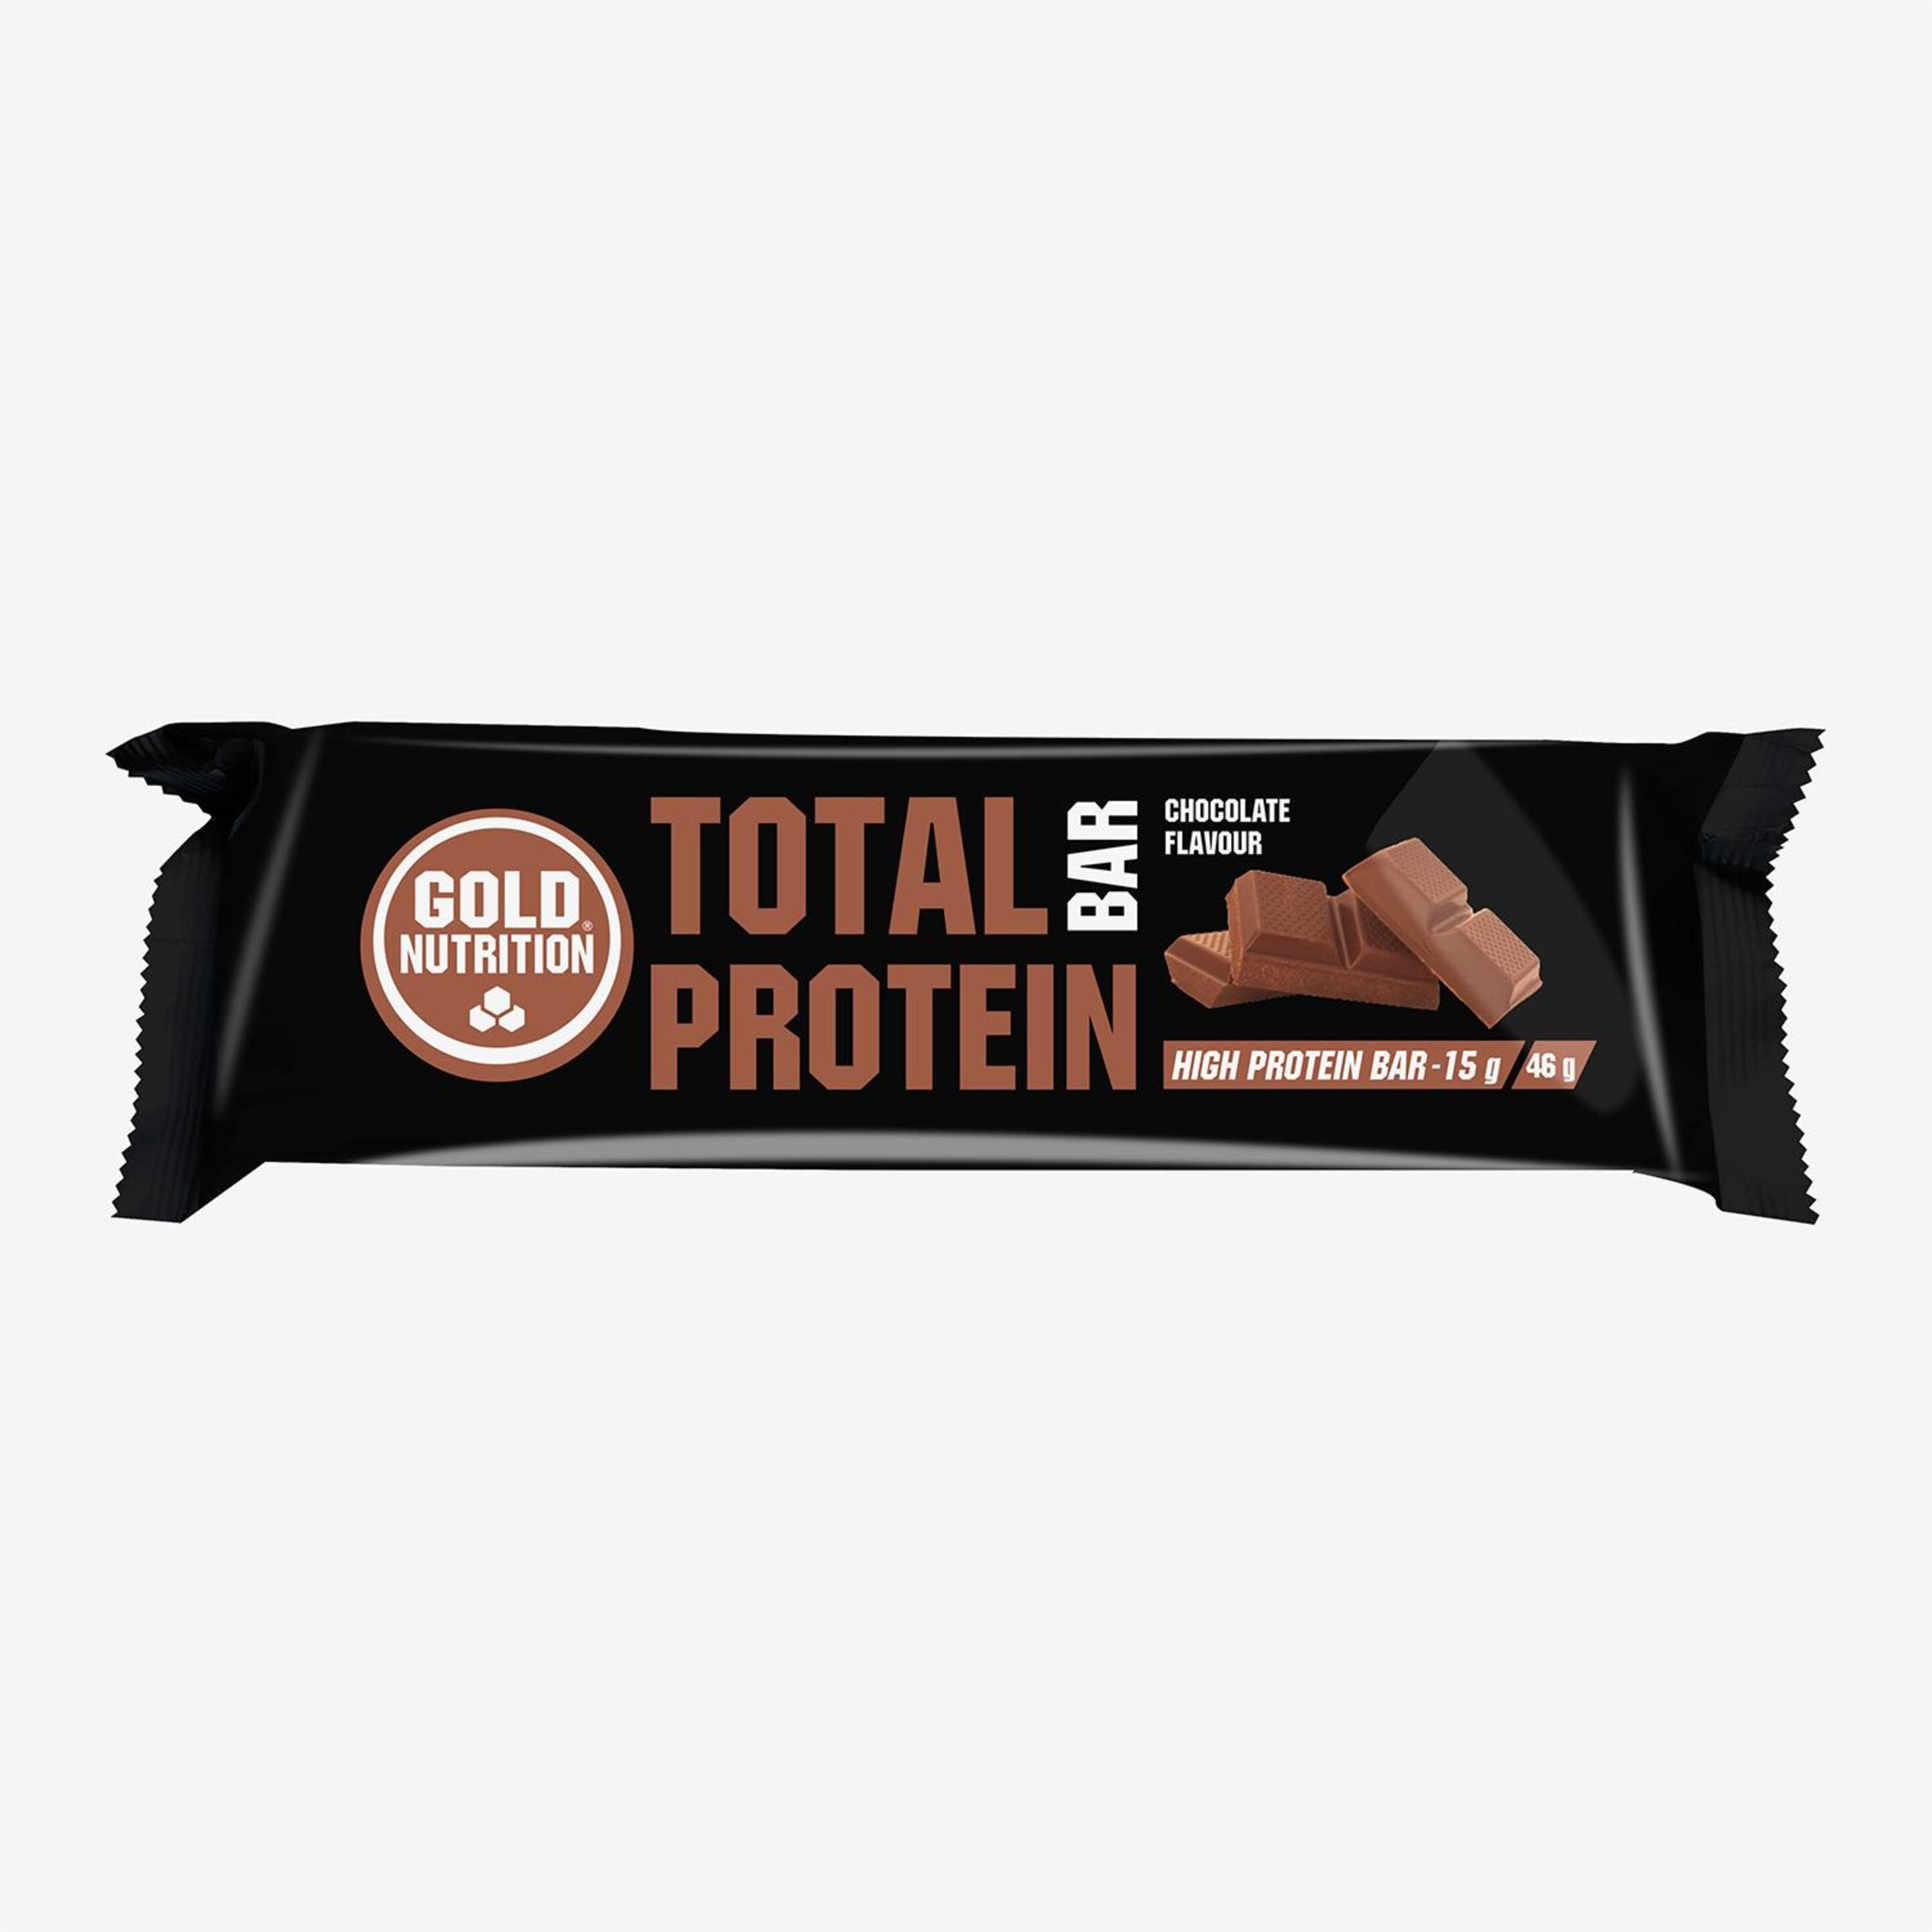 Golden Nutrition Total Protein